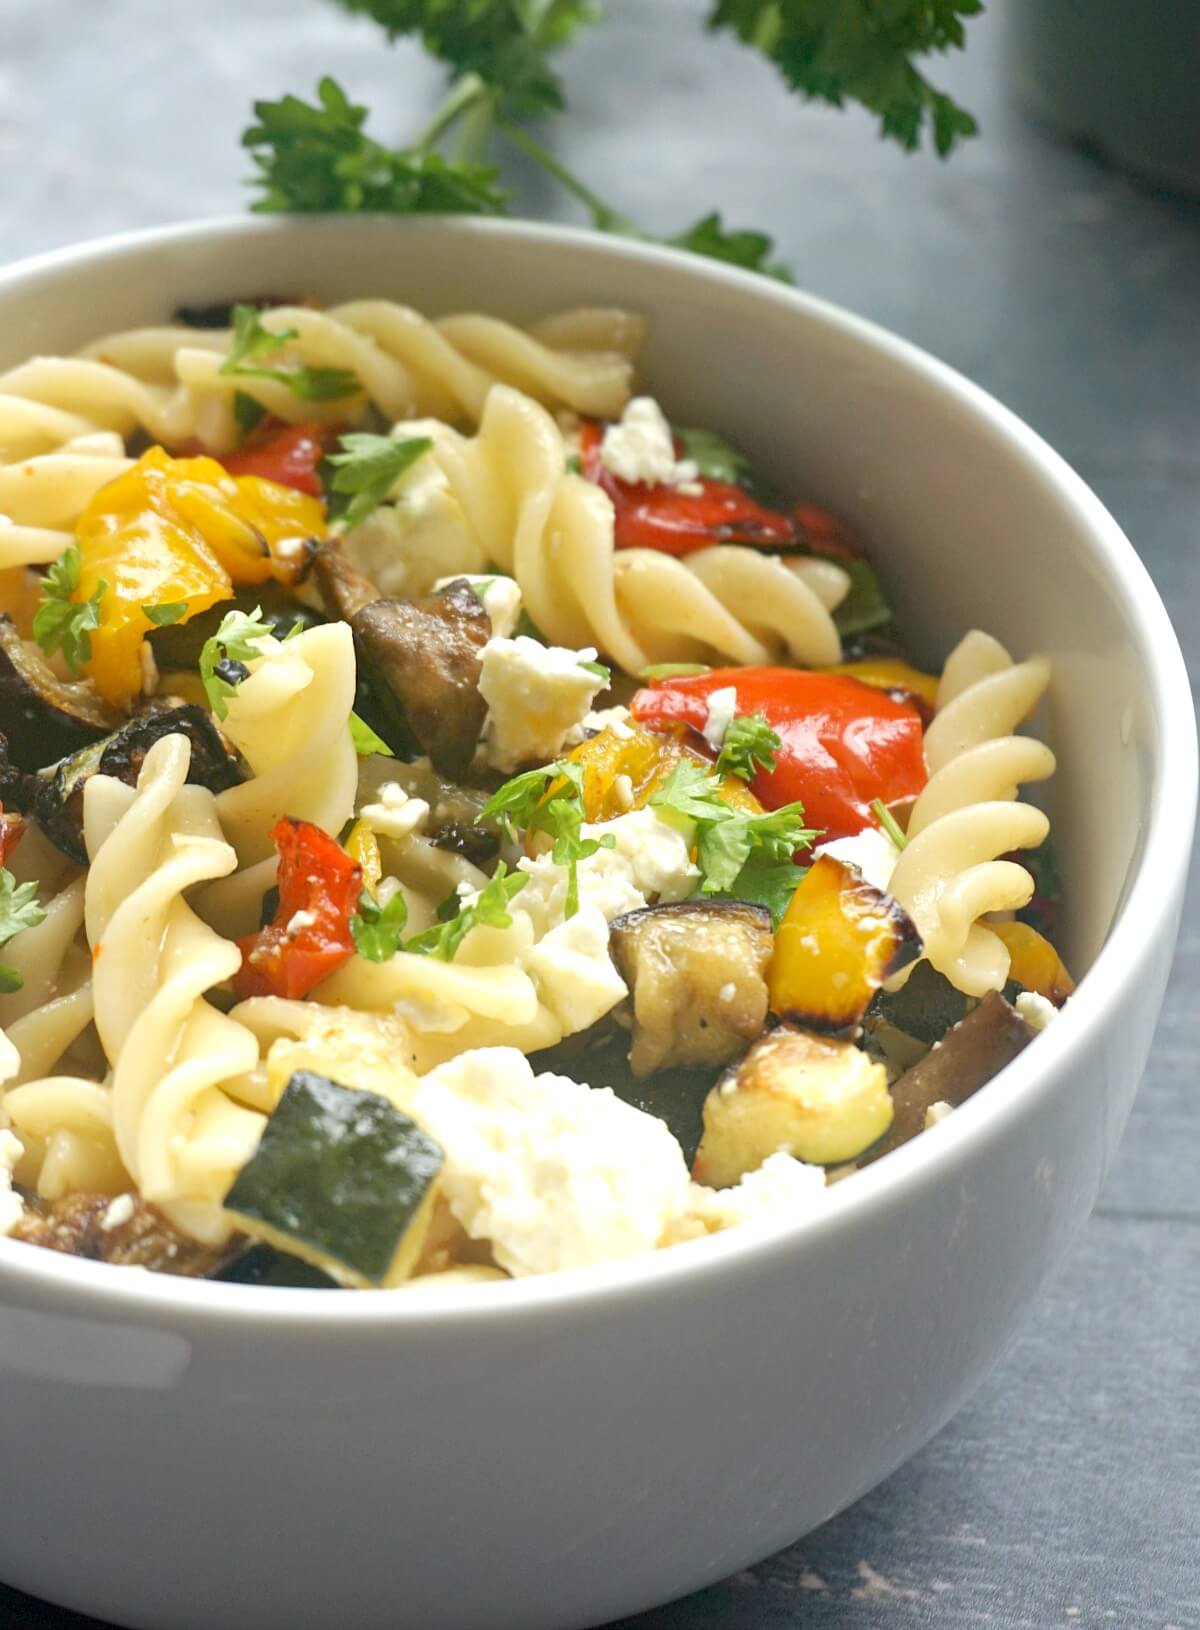 Close-up shoot of a bowl of pasta salad with veggies and feta.